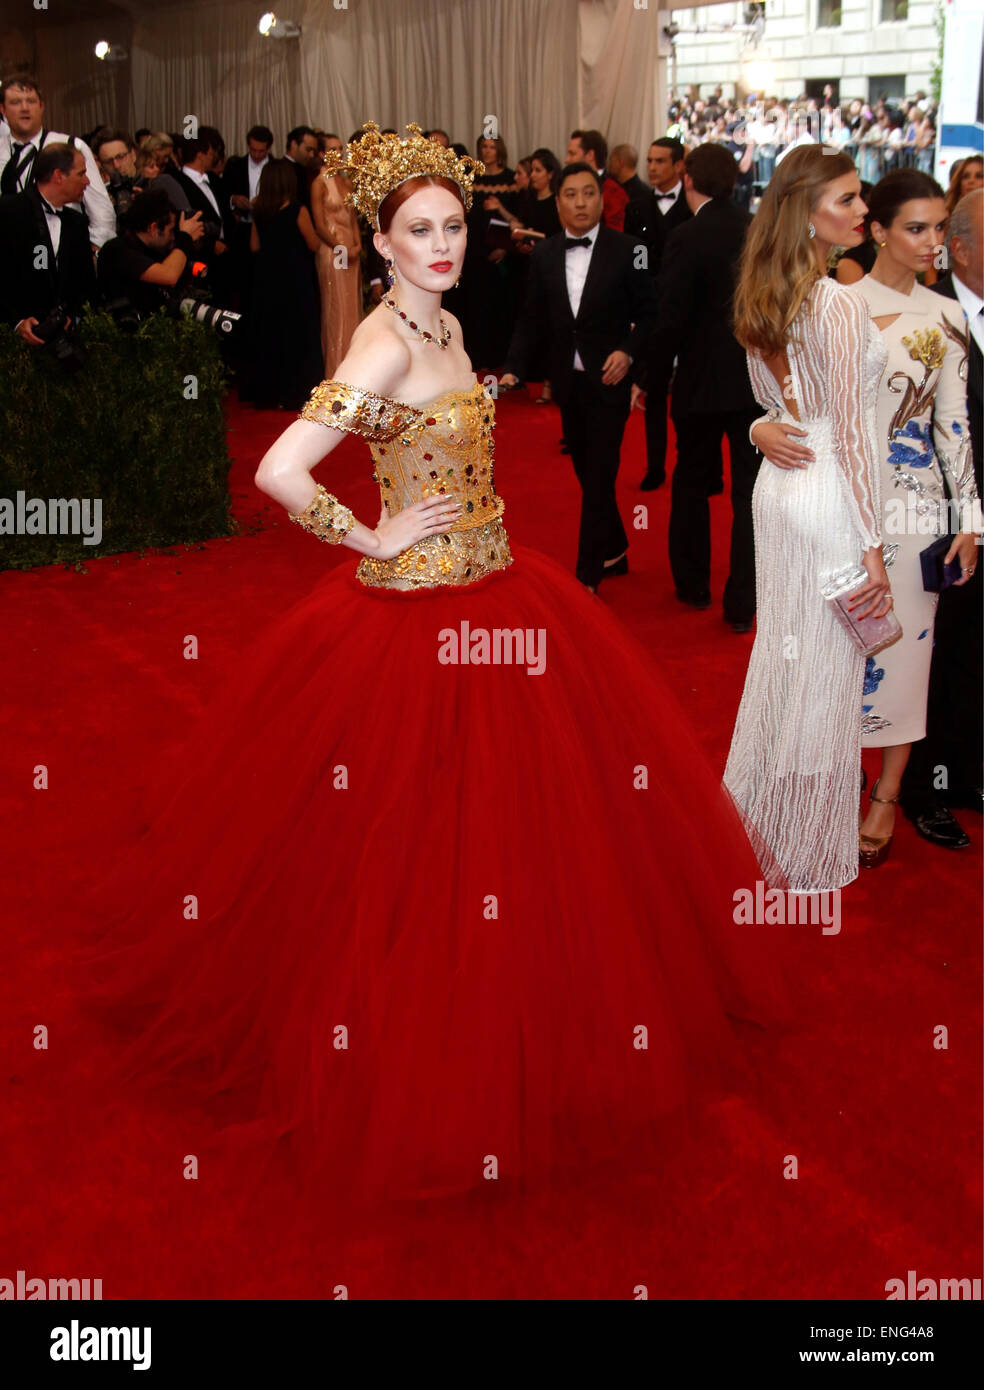 New York, USA . 4th May, 2015. Musician Karen Elson attends the 2015 Costume Institute Gala Benefit celebrating the exhibition 'China: Through the Looking Glass' at The Metropolitan Museum of Art in New York, USA, on 04 May 2015. Photo: Hubert Boesl/dpa/Alamy Live News Stock Photo